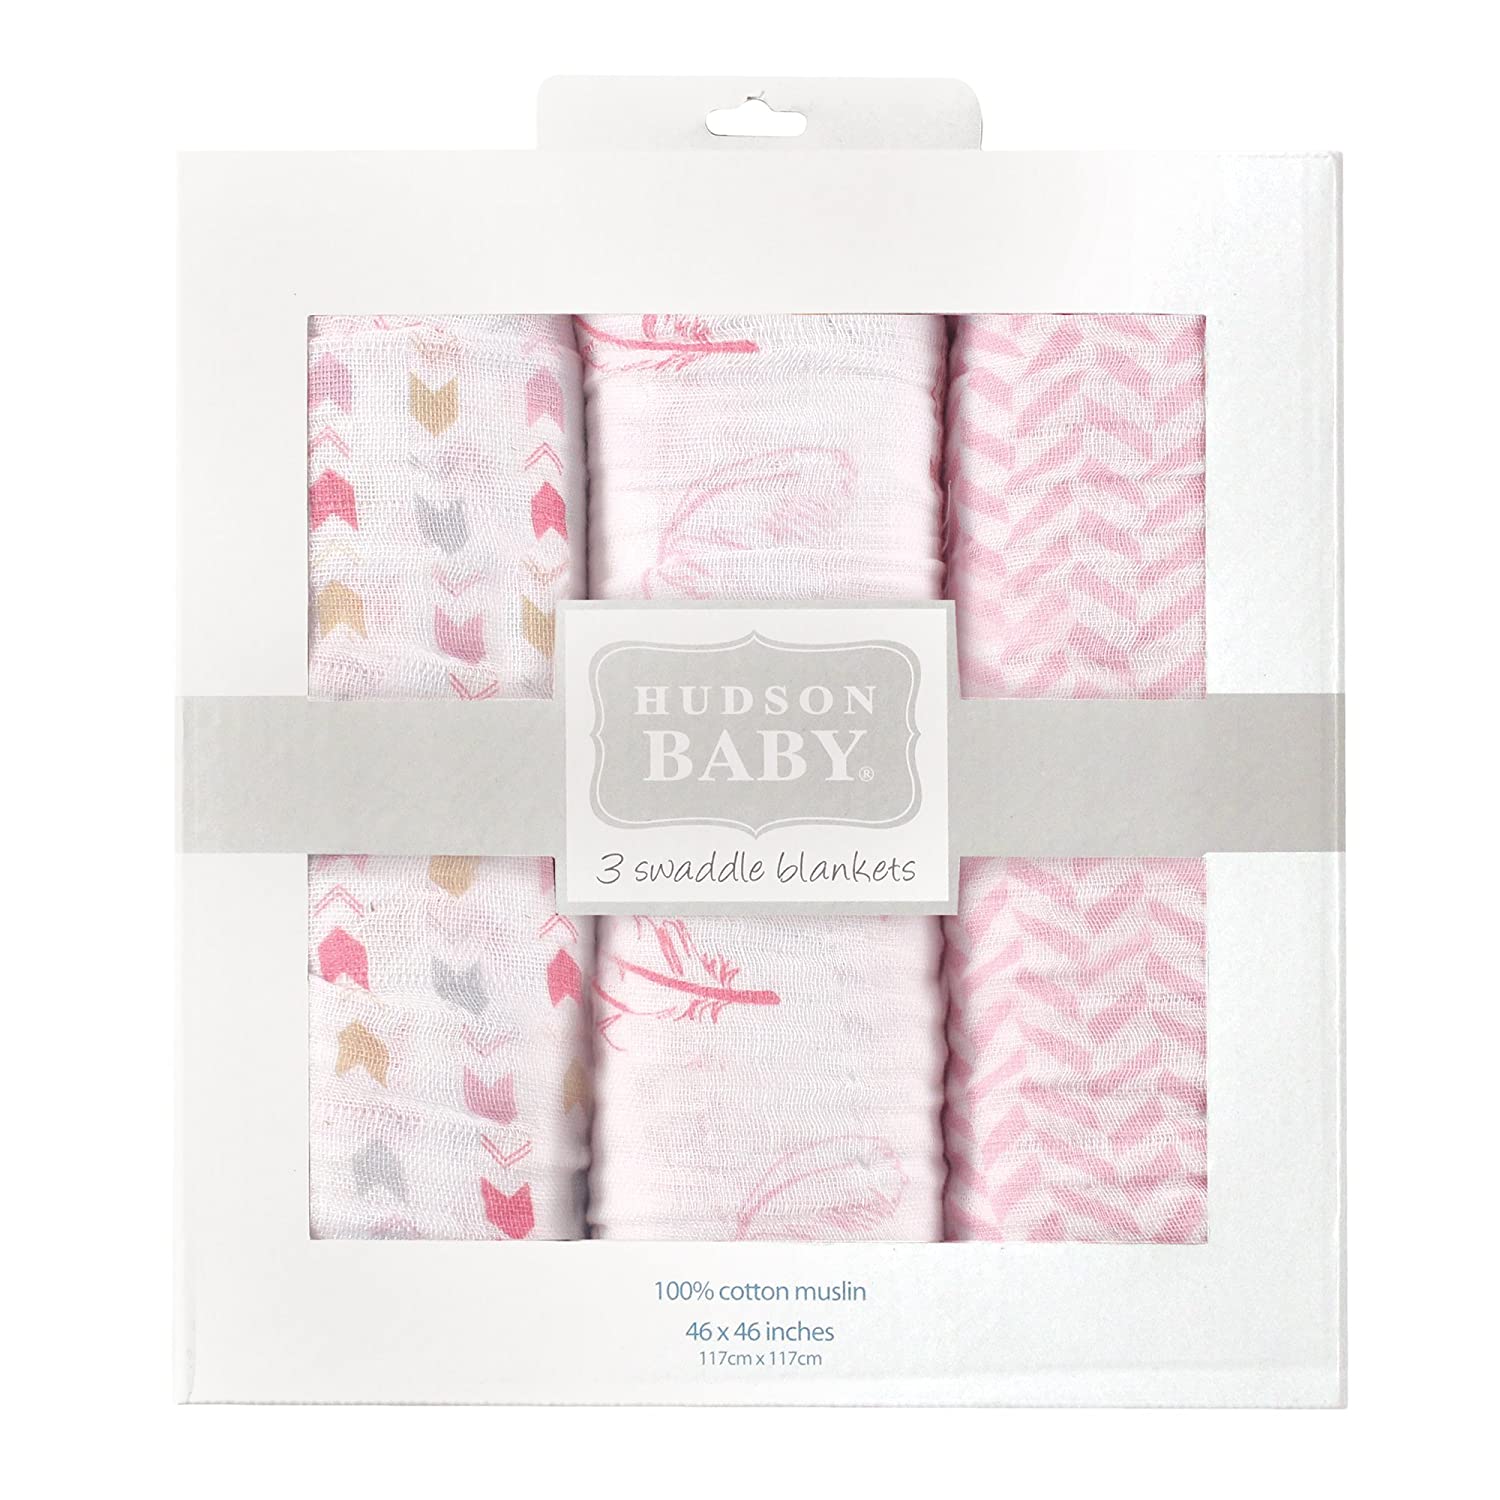 Hudson Baby Unisex Baby Cotton Muslin Swaddle Blankets, Pink Feather 3-Pack, One Size